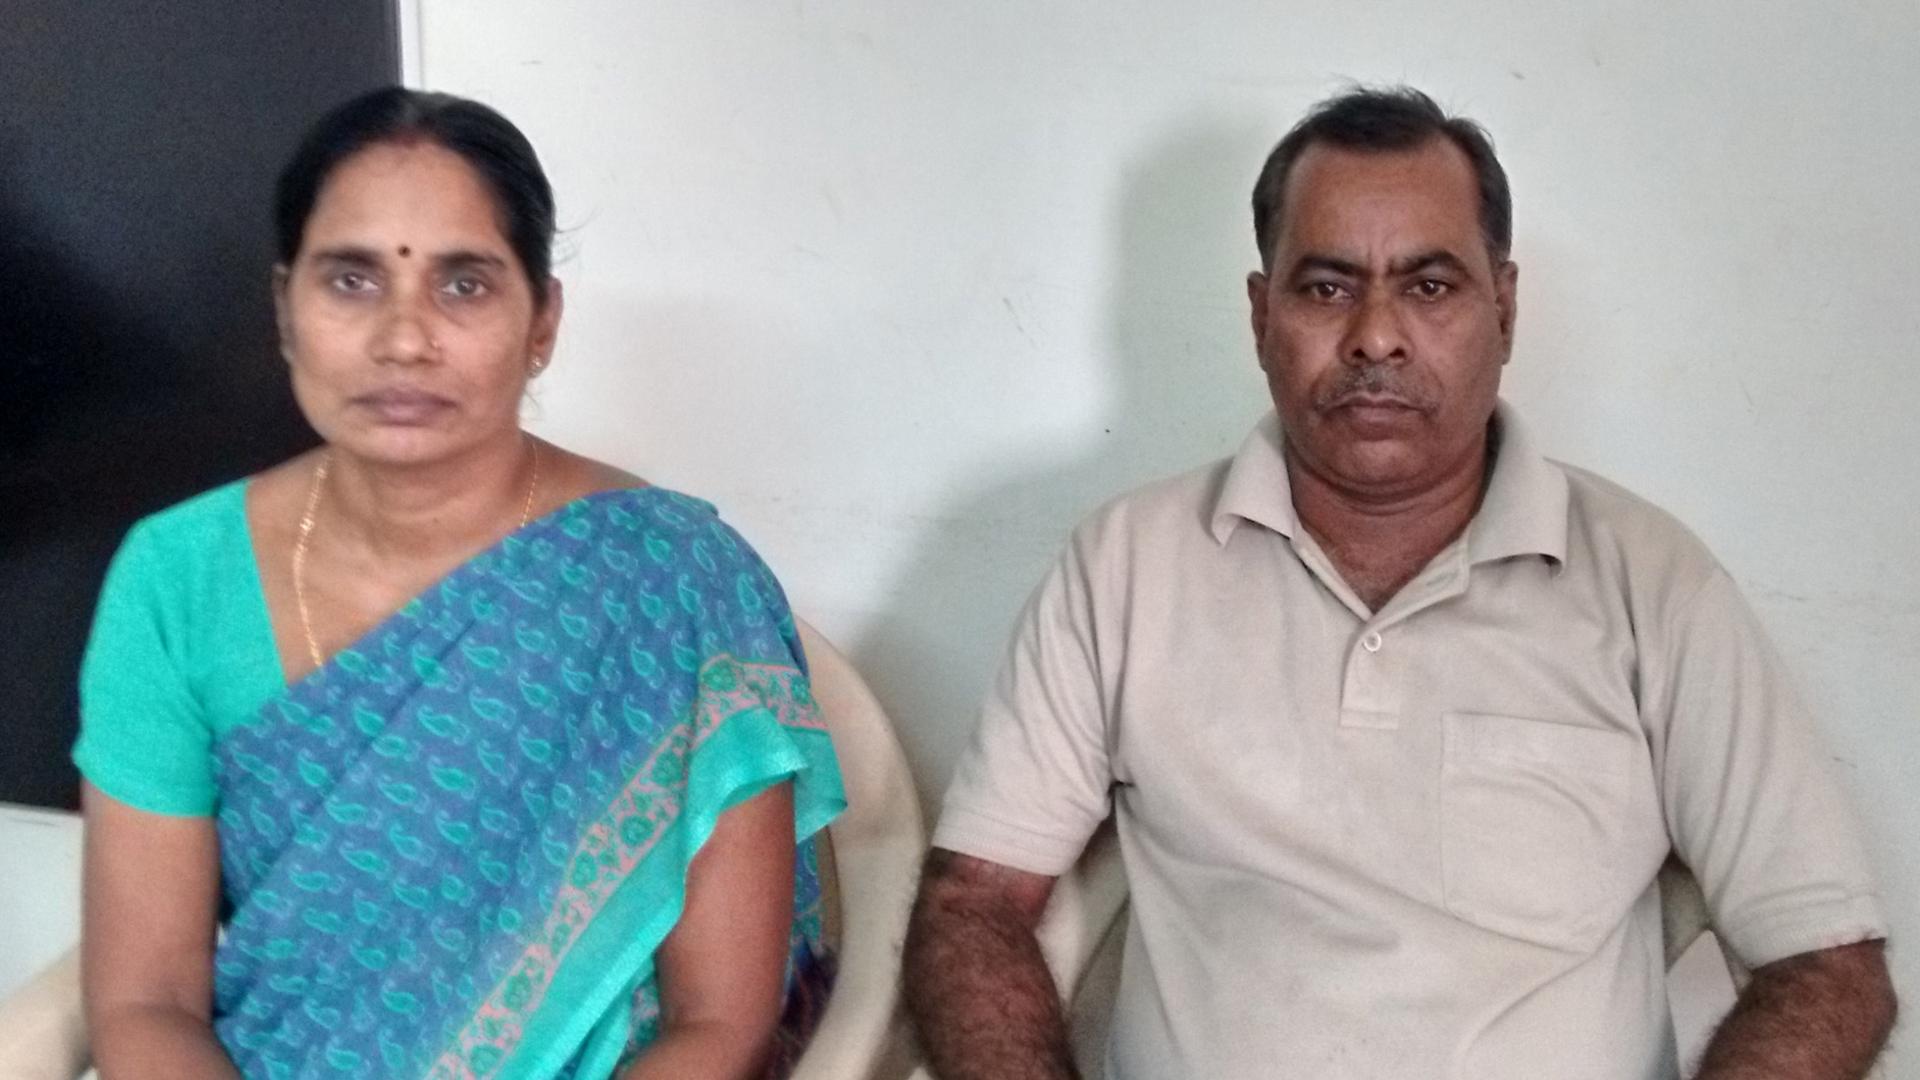 Asha Devi and her husband Badrinath Singh in their apartment in New Delhi. Three years after her daughter's gang rape and murder, Asha says attitudes about rape victims are starting to change in India. “Earlier, families who experienced this would hide it